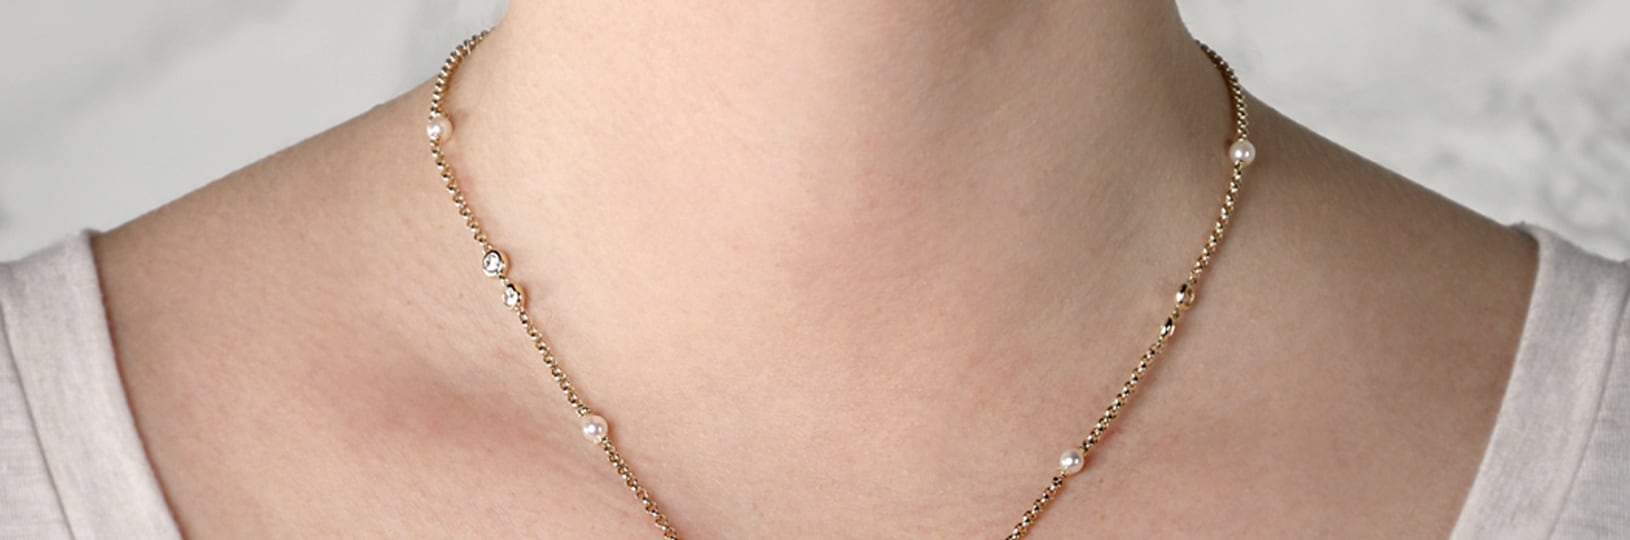 Cultured pearl necklace chain